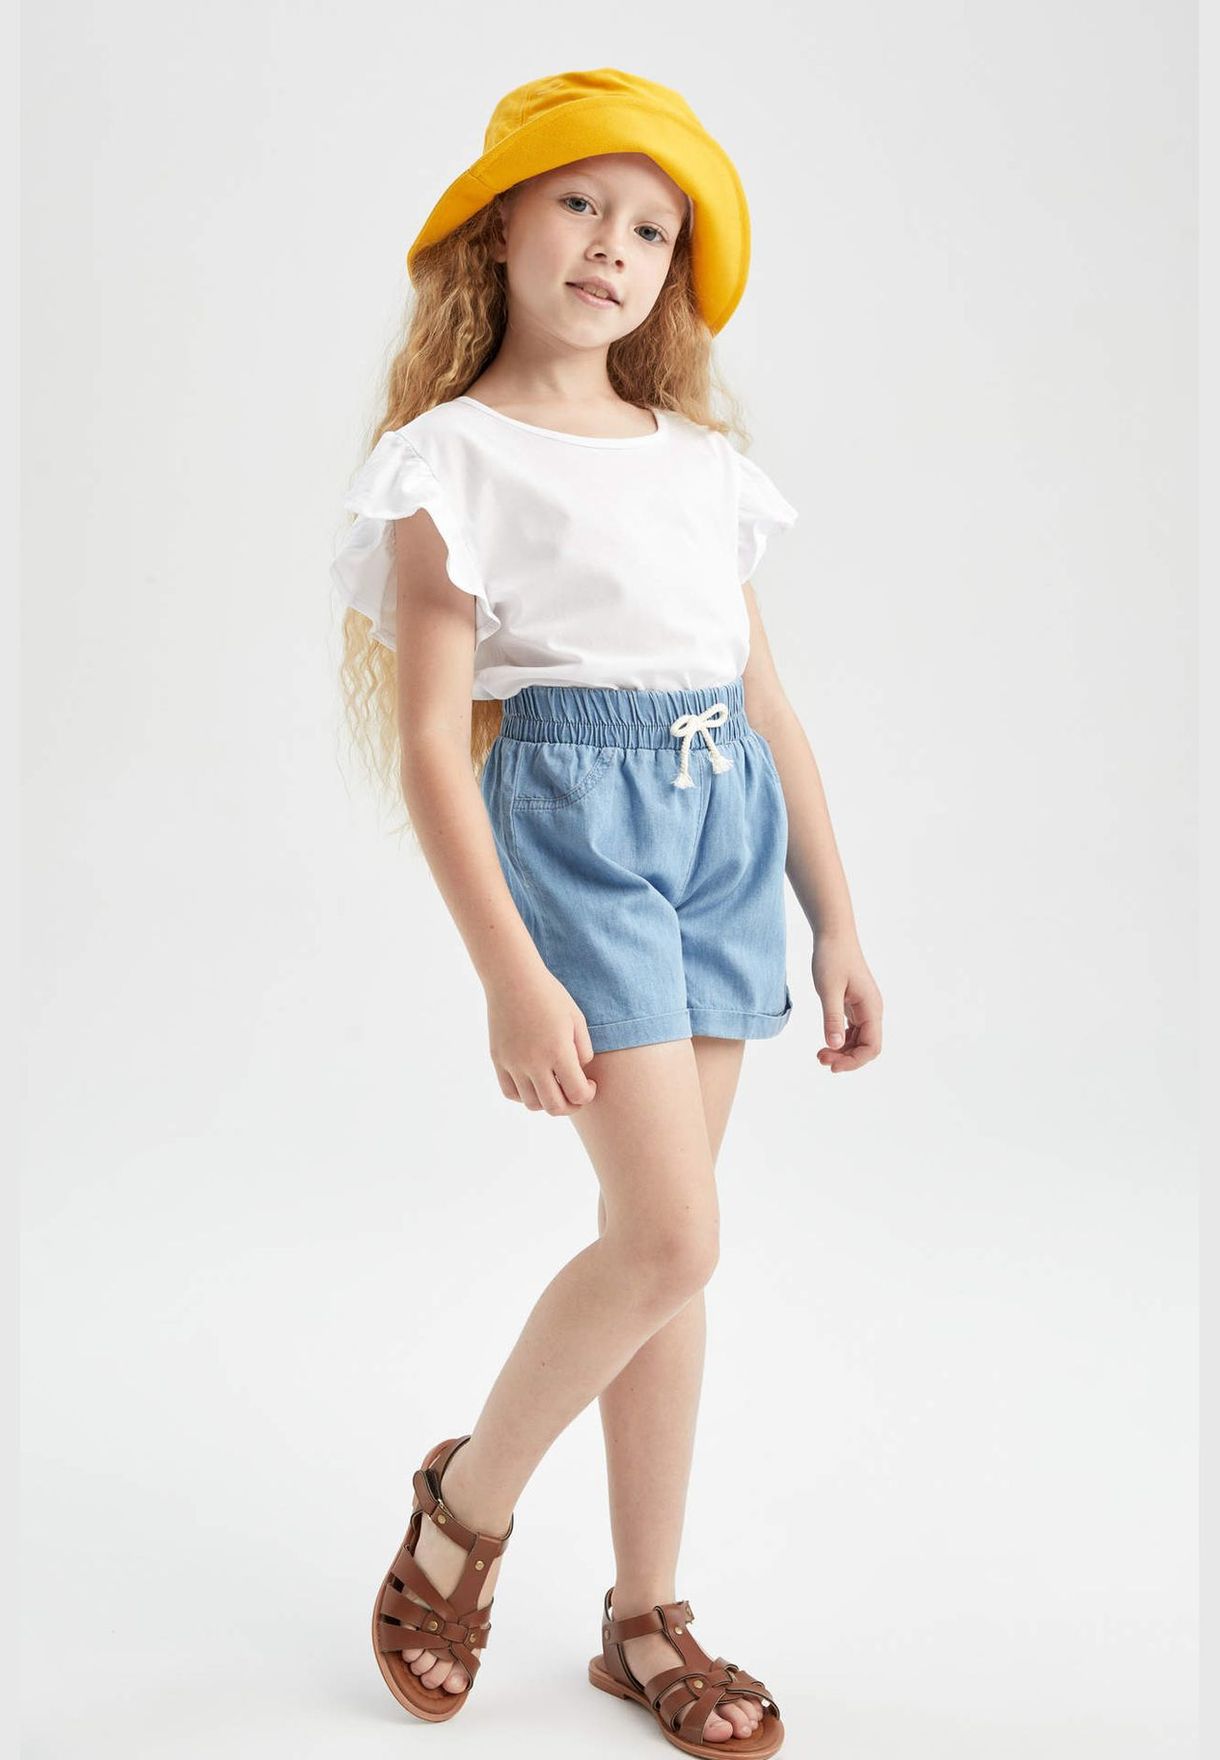 Relaxed Fit Stretch Denim Jean Shorts With Drawstring Tie